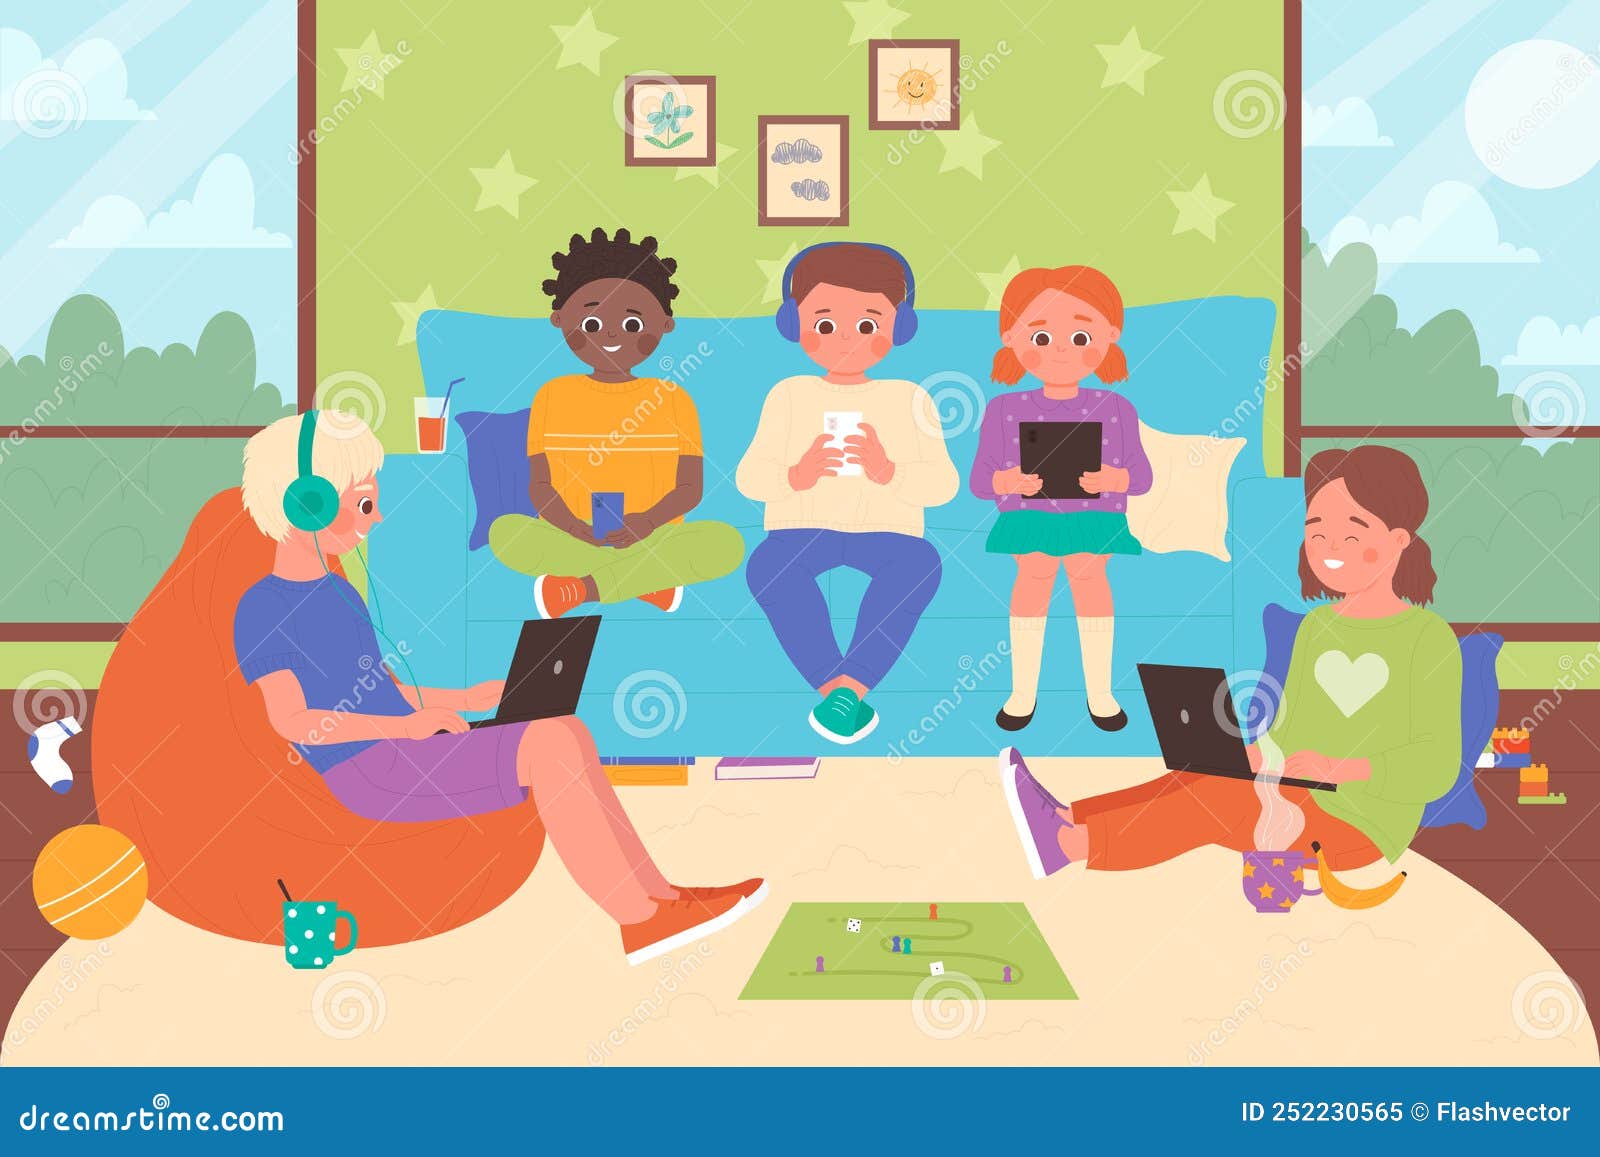 Online Games for Kids to Play with Friends